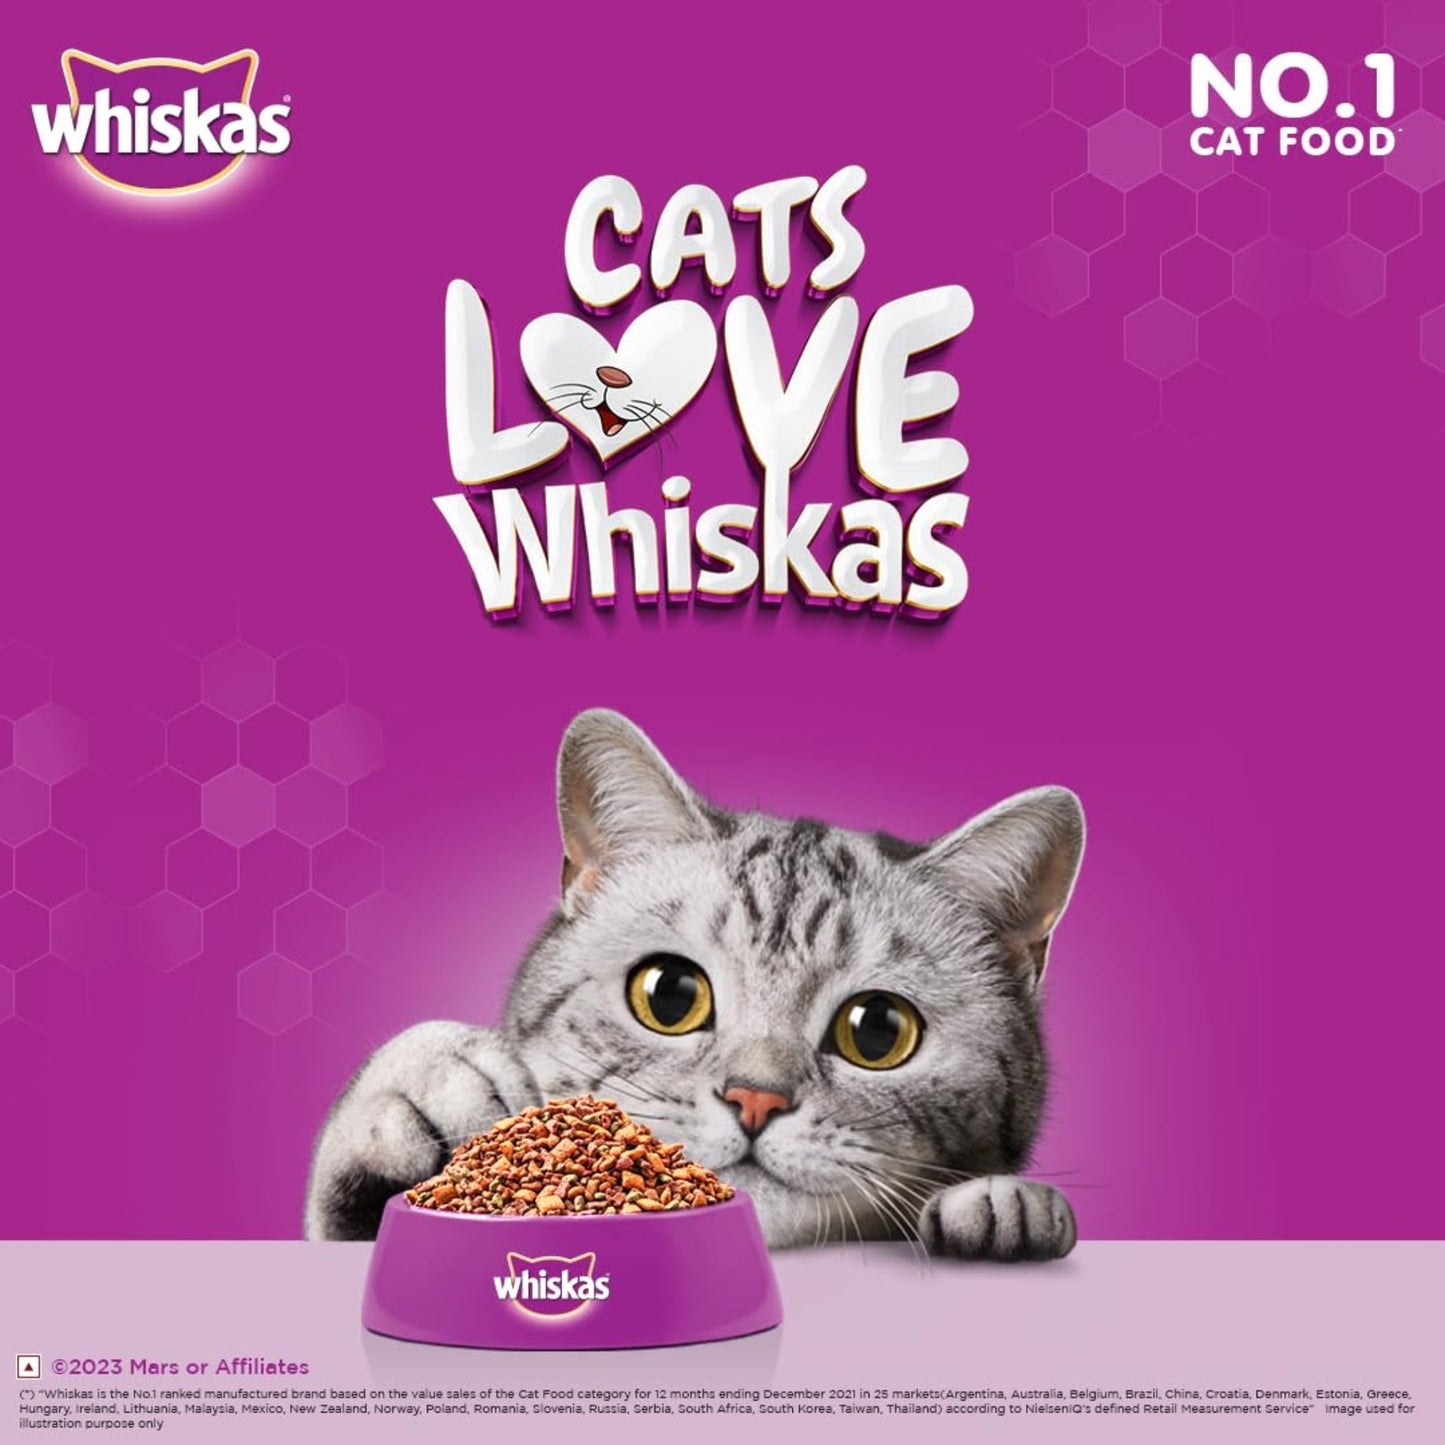 Whiskas Dry Cat Food for Mother and Baby Cat, Ocean Fish Flavor, 1.1Kg